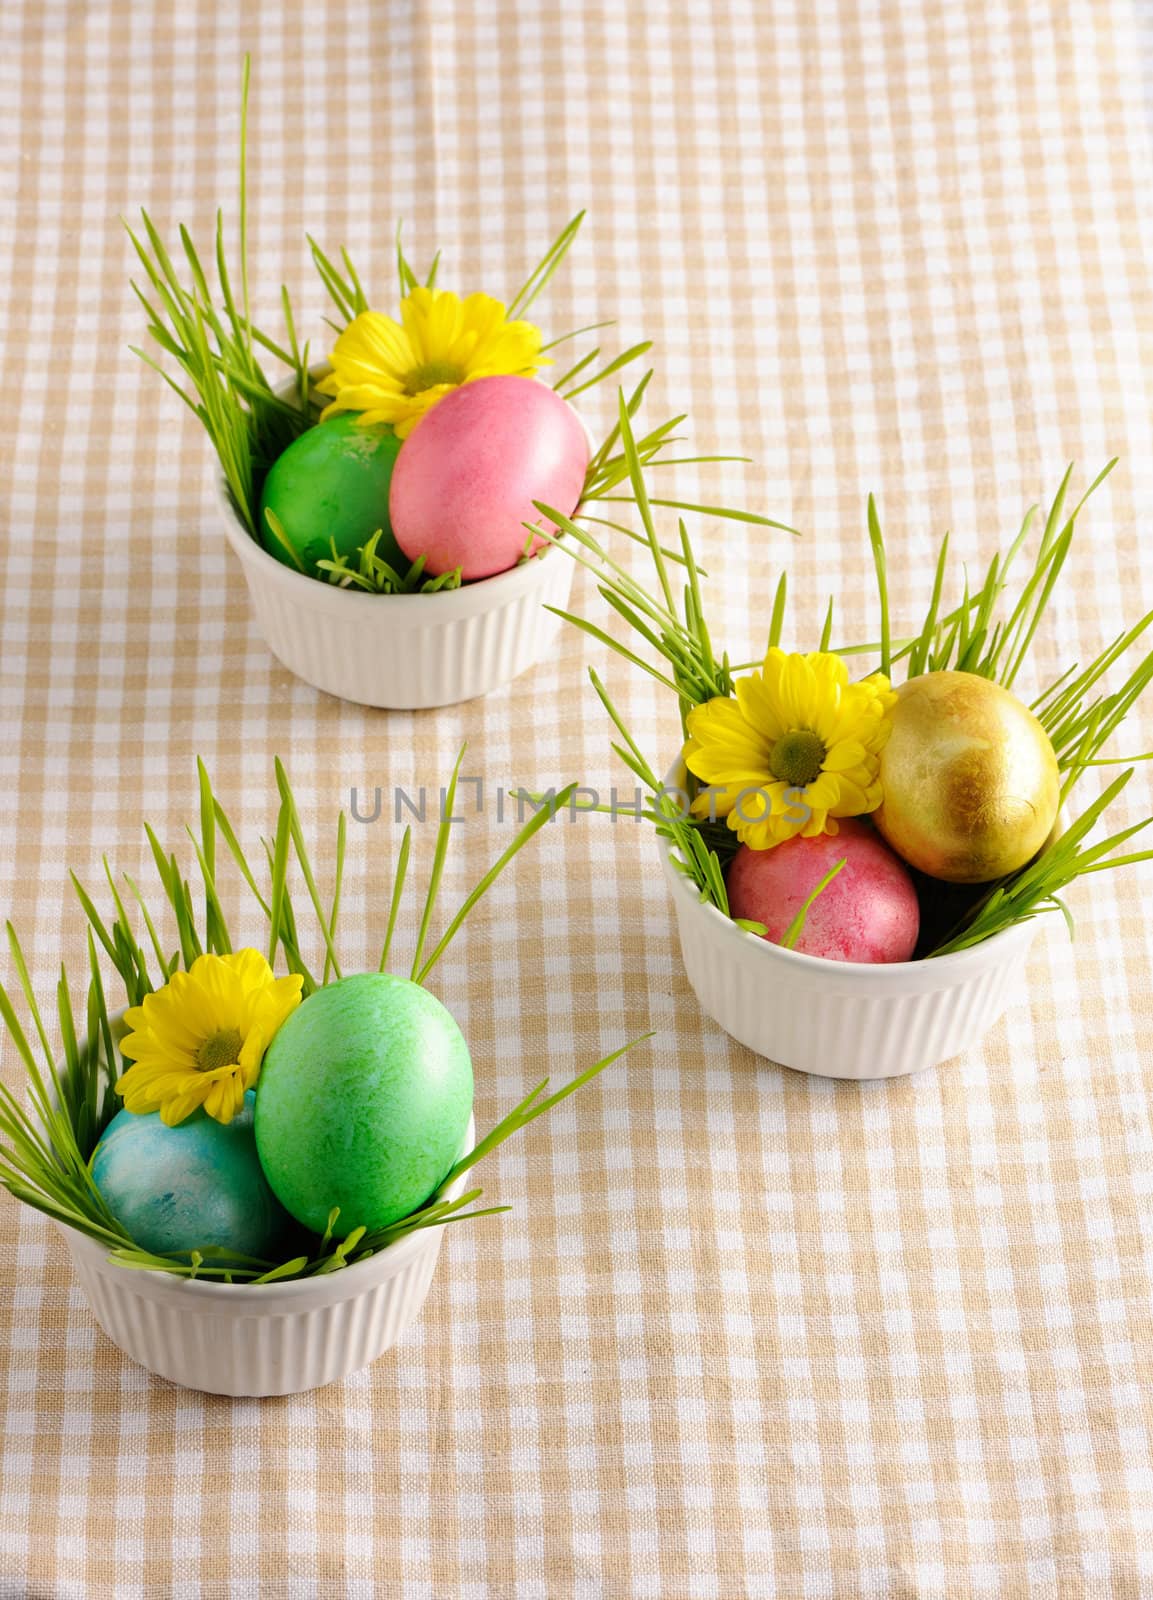 Colored easter eggs on tablecloth